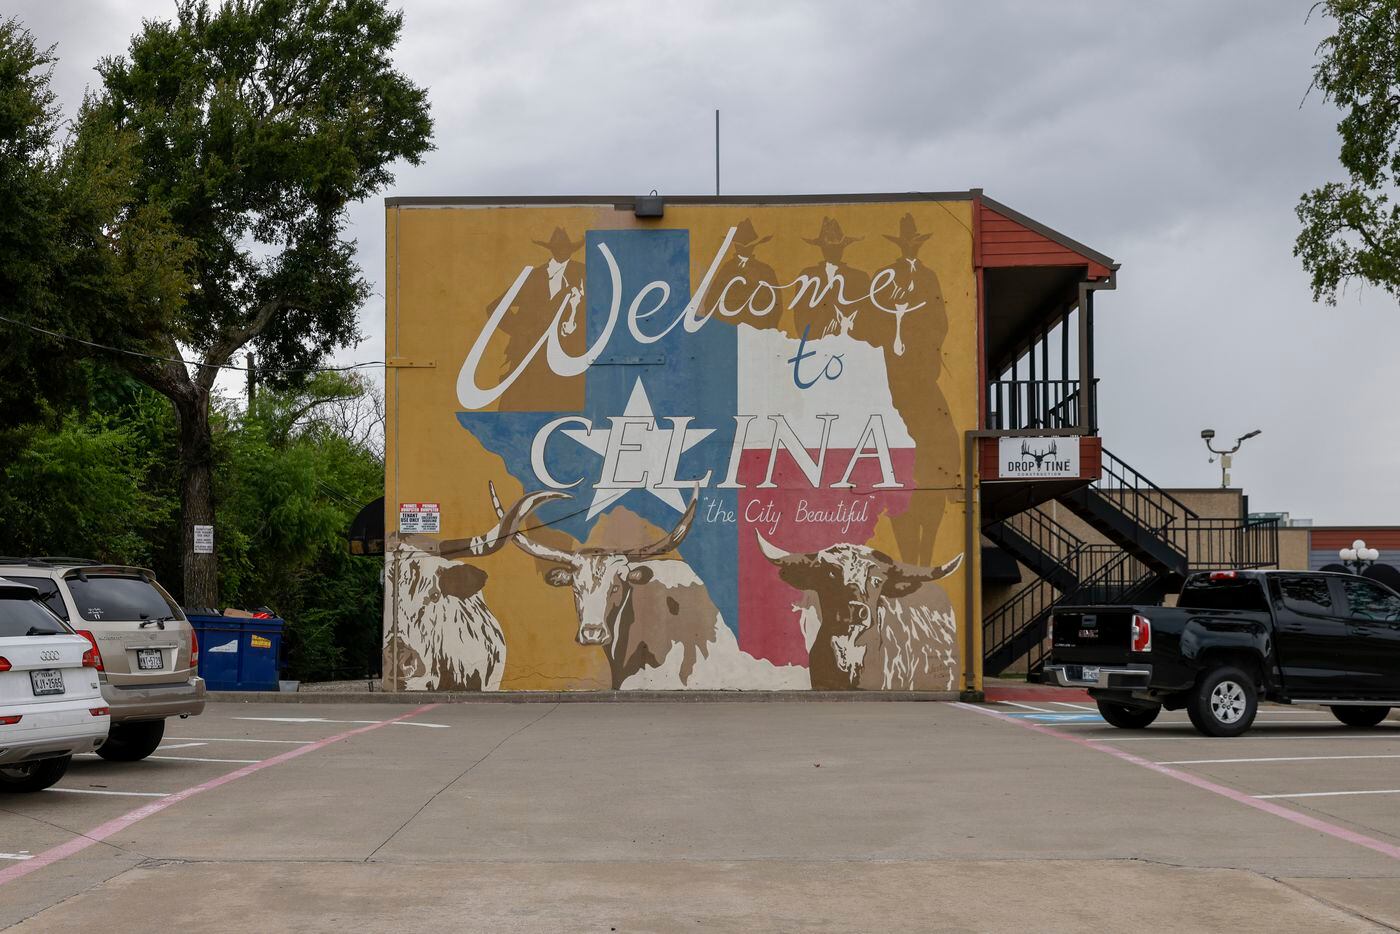 A mural welcomes people to Celina.